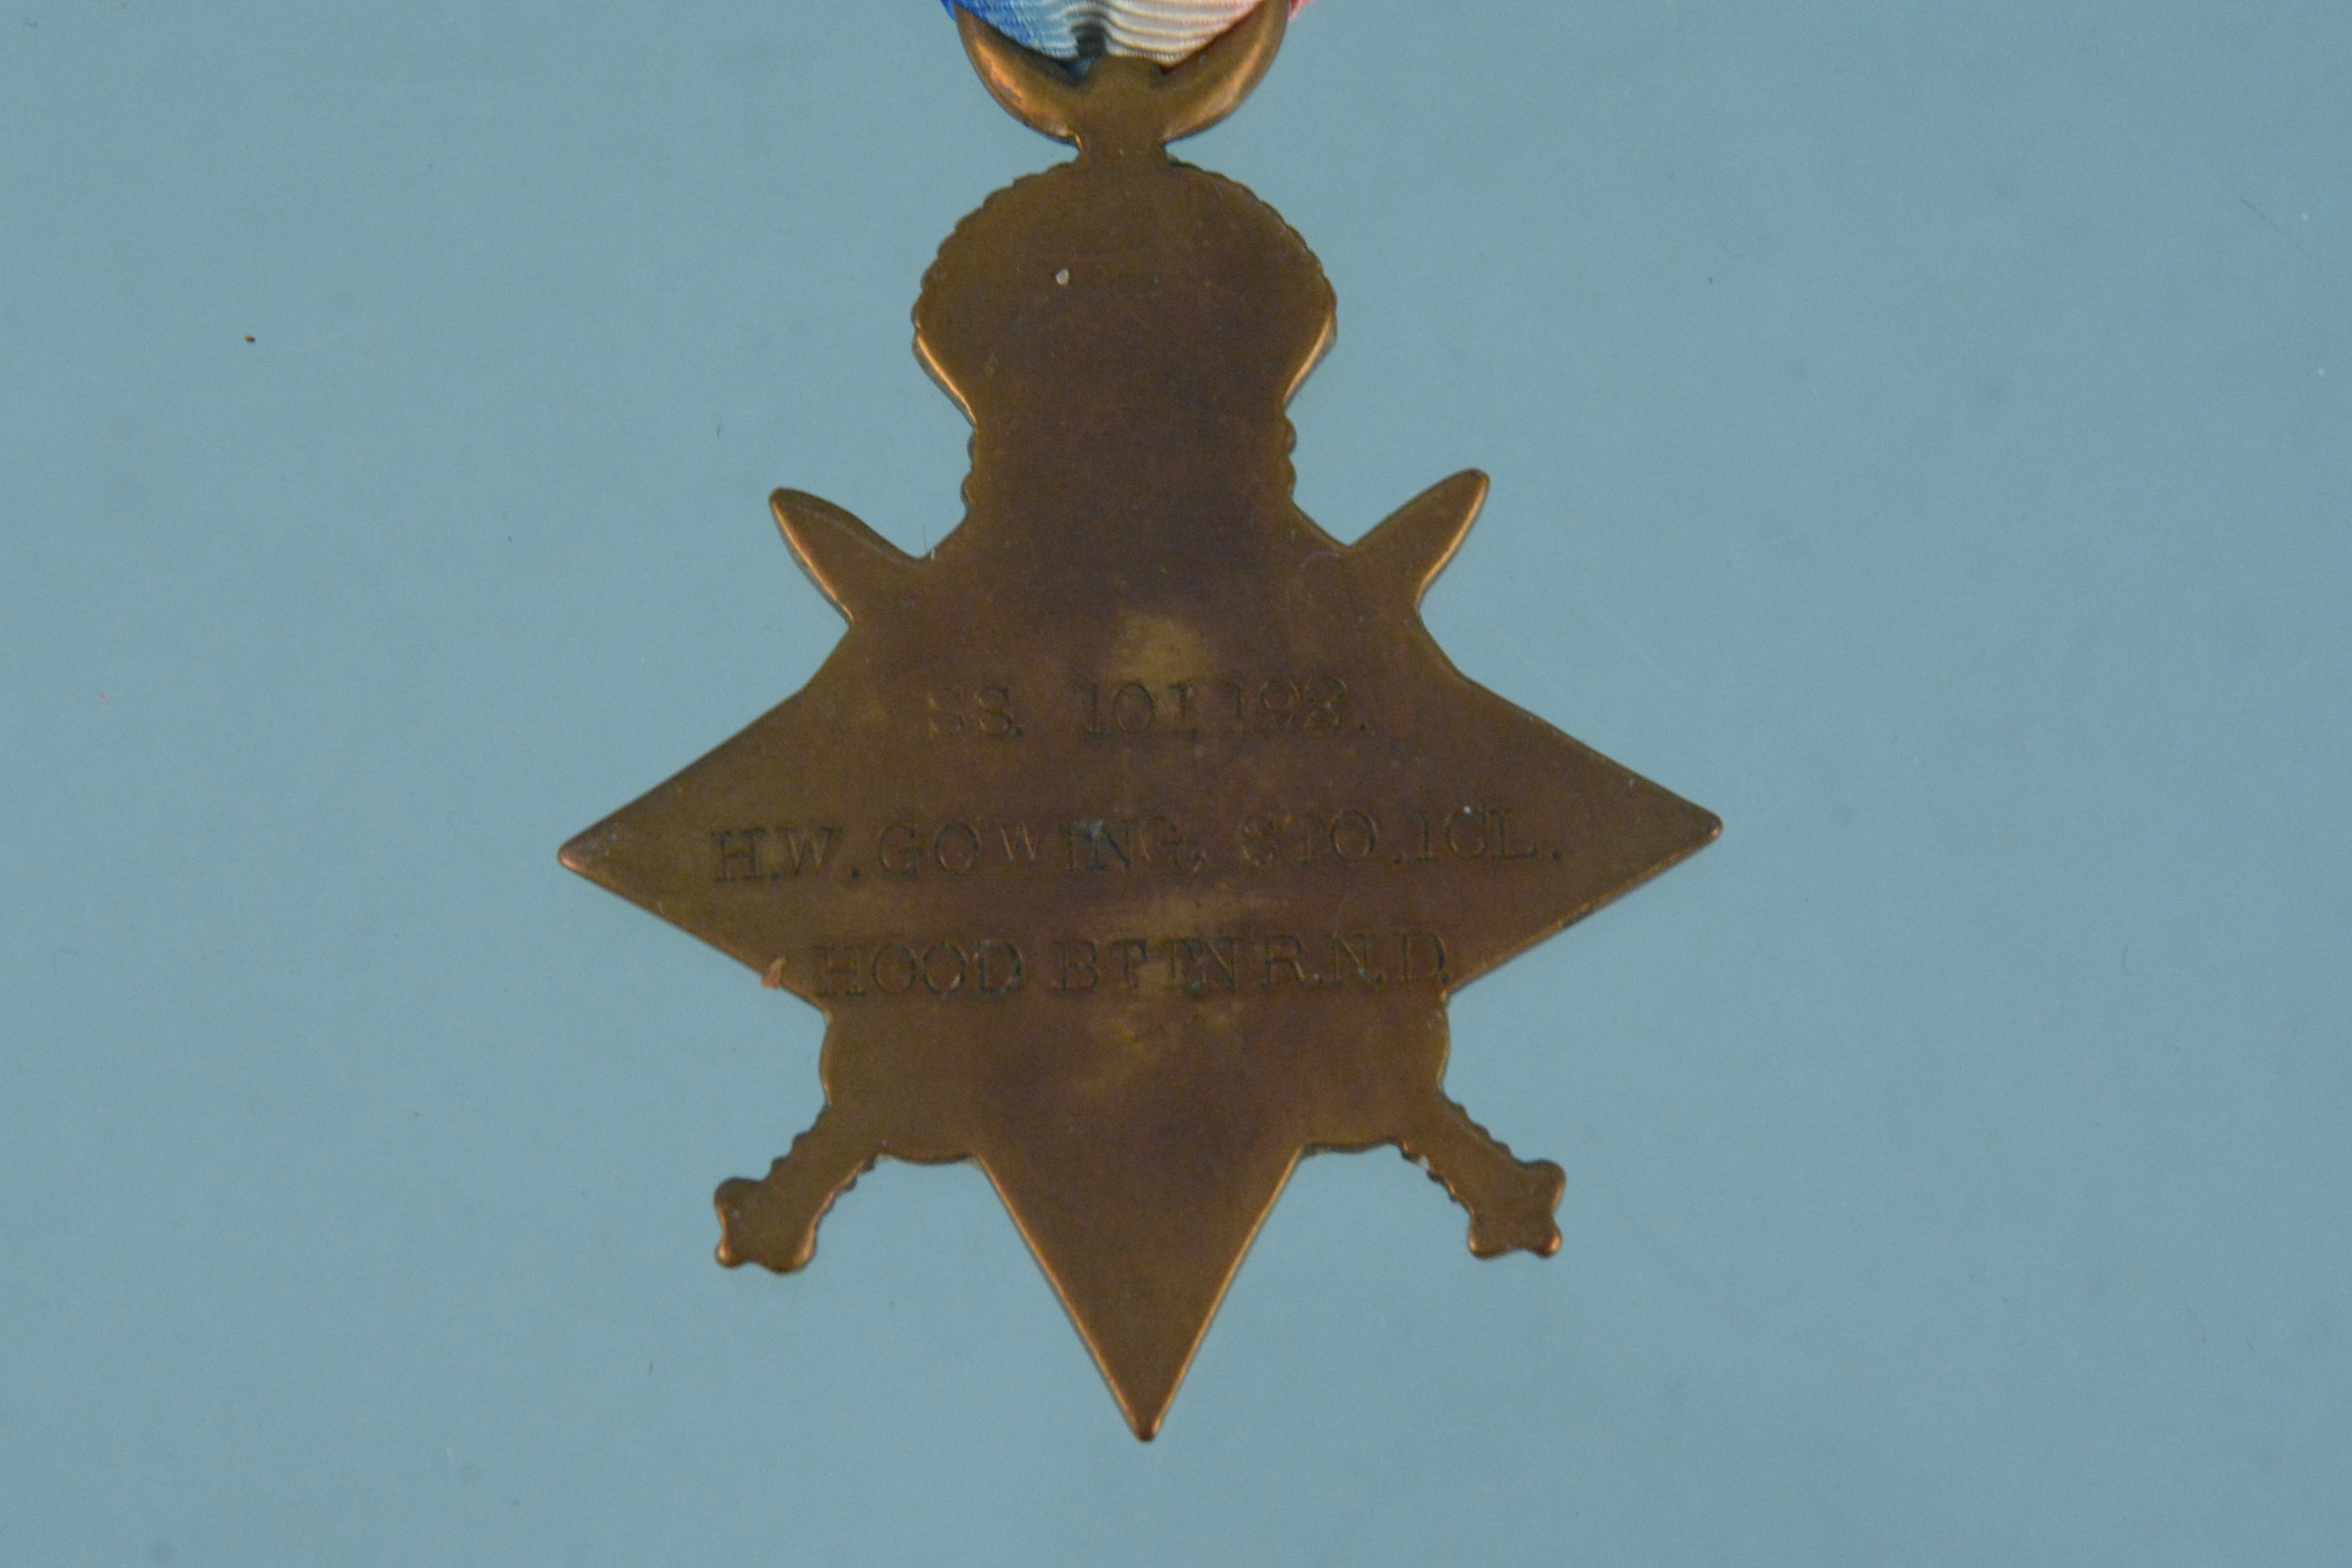 A WWI 1914 Star to SS.101192 H.W.Gowing, STO. ICL. Hood Bttn R.N.D. - Image 3 of 3